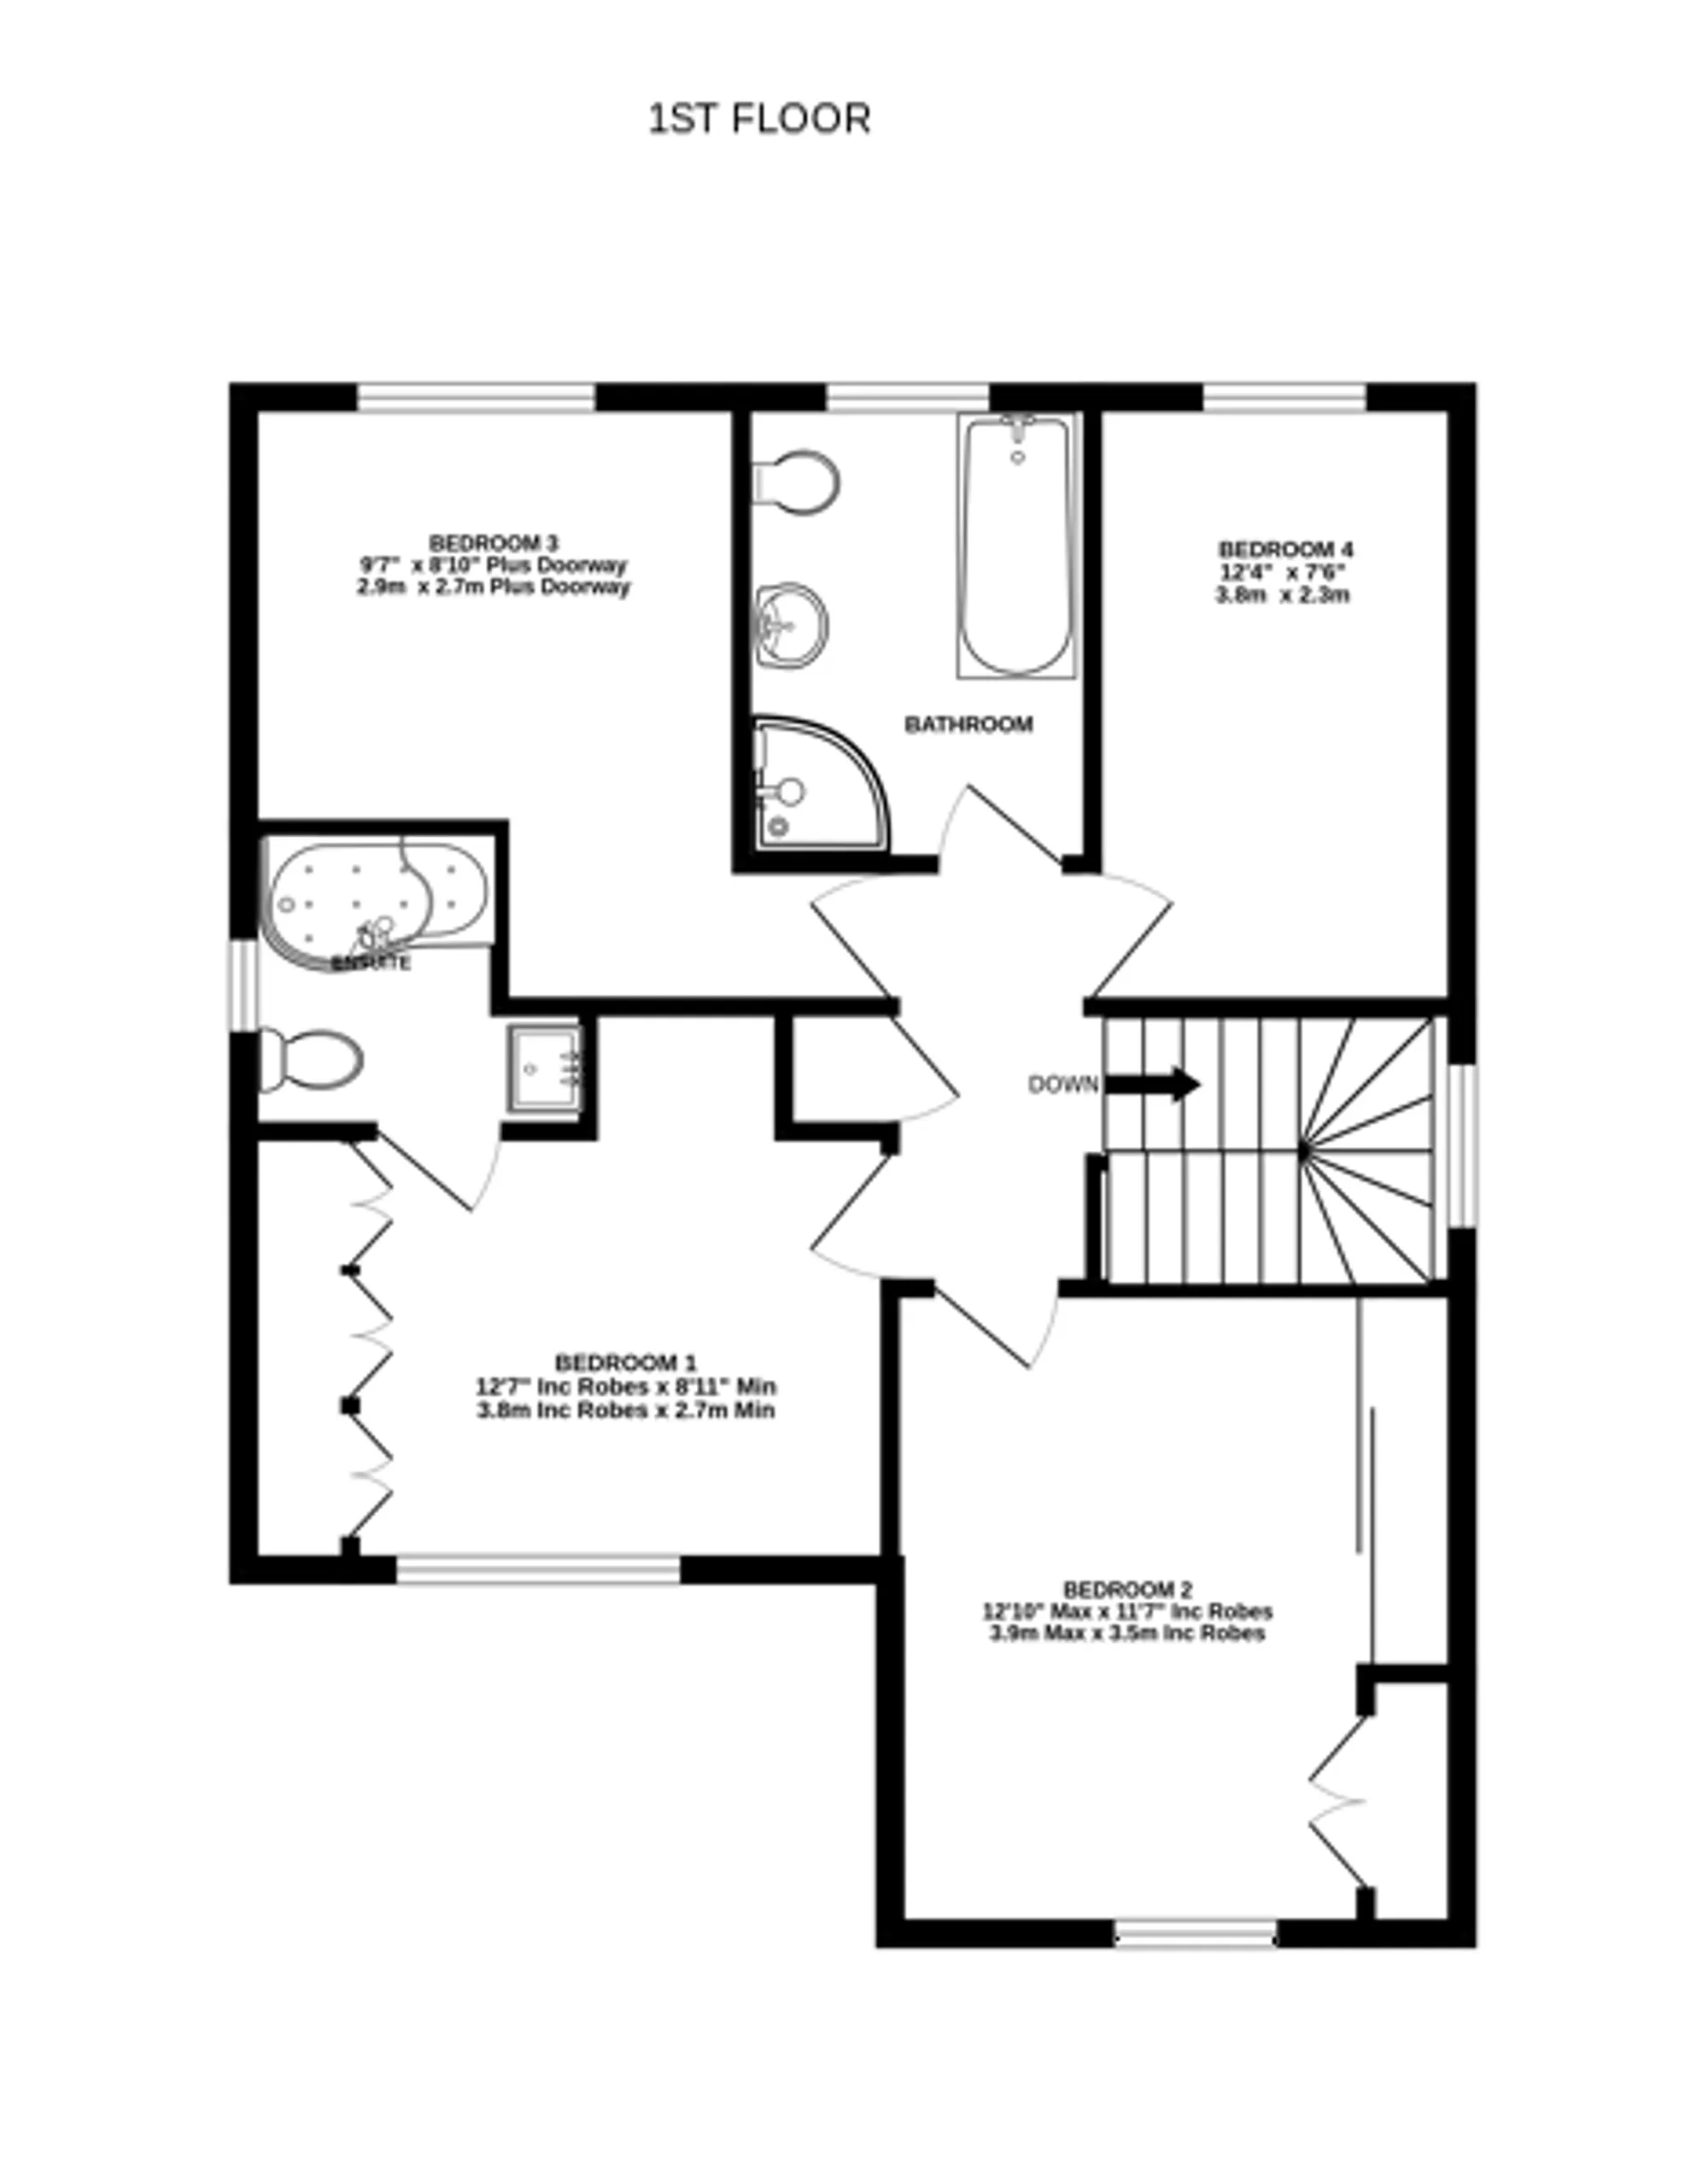 4 bed detached house for sale in Soar Road, Loughborough - Property floorplan